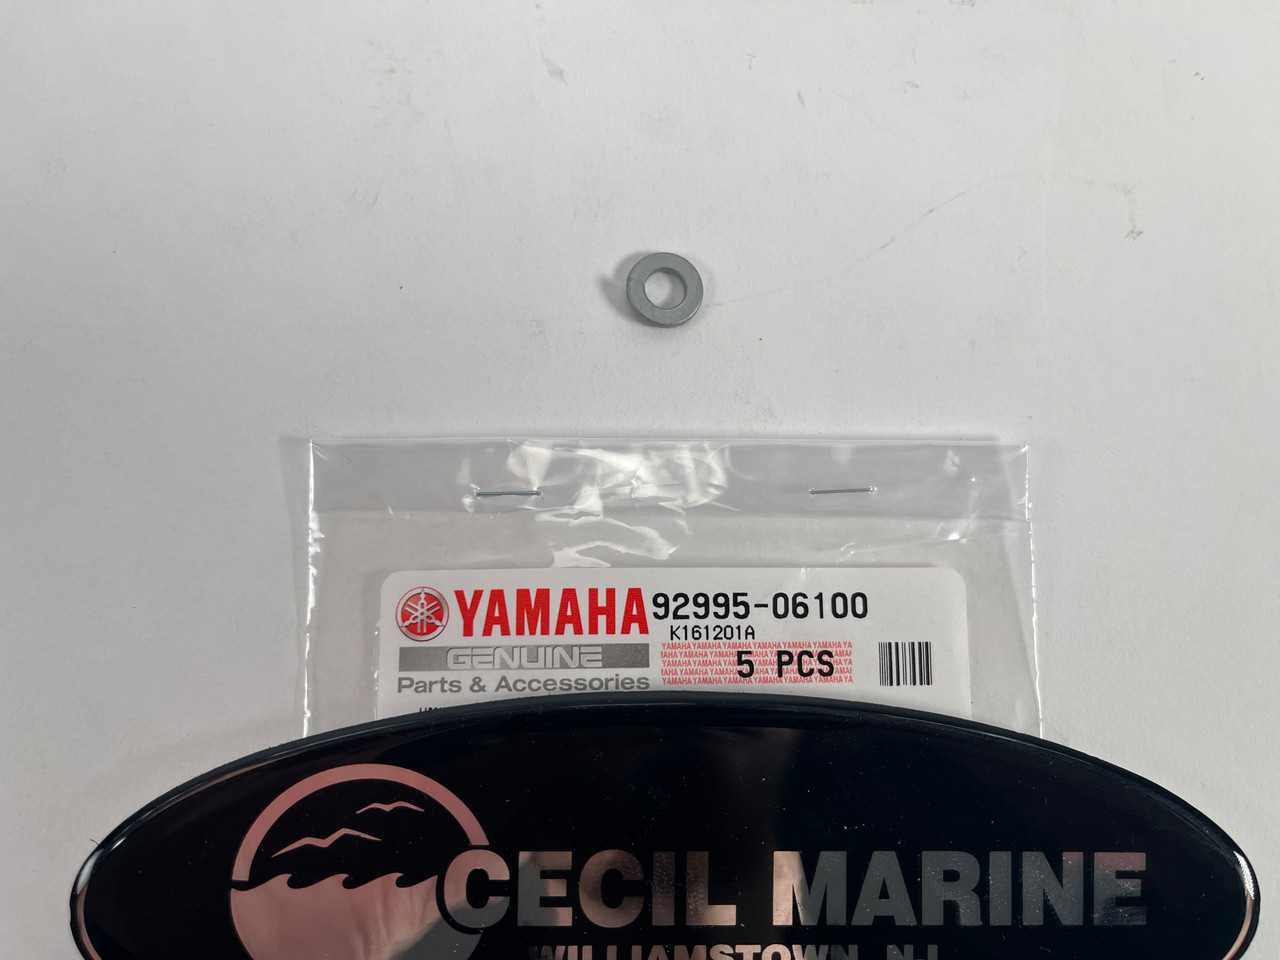 $2.99* GENUINE YAMAHA WASHER 92995-06100-00  *In Stock & Ready To Ship!